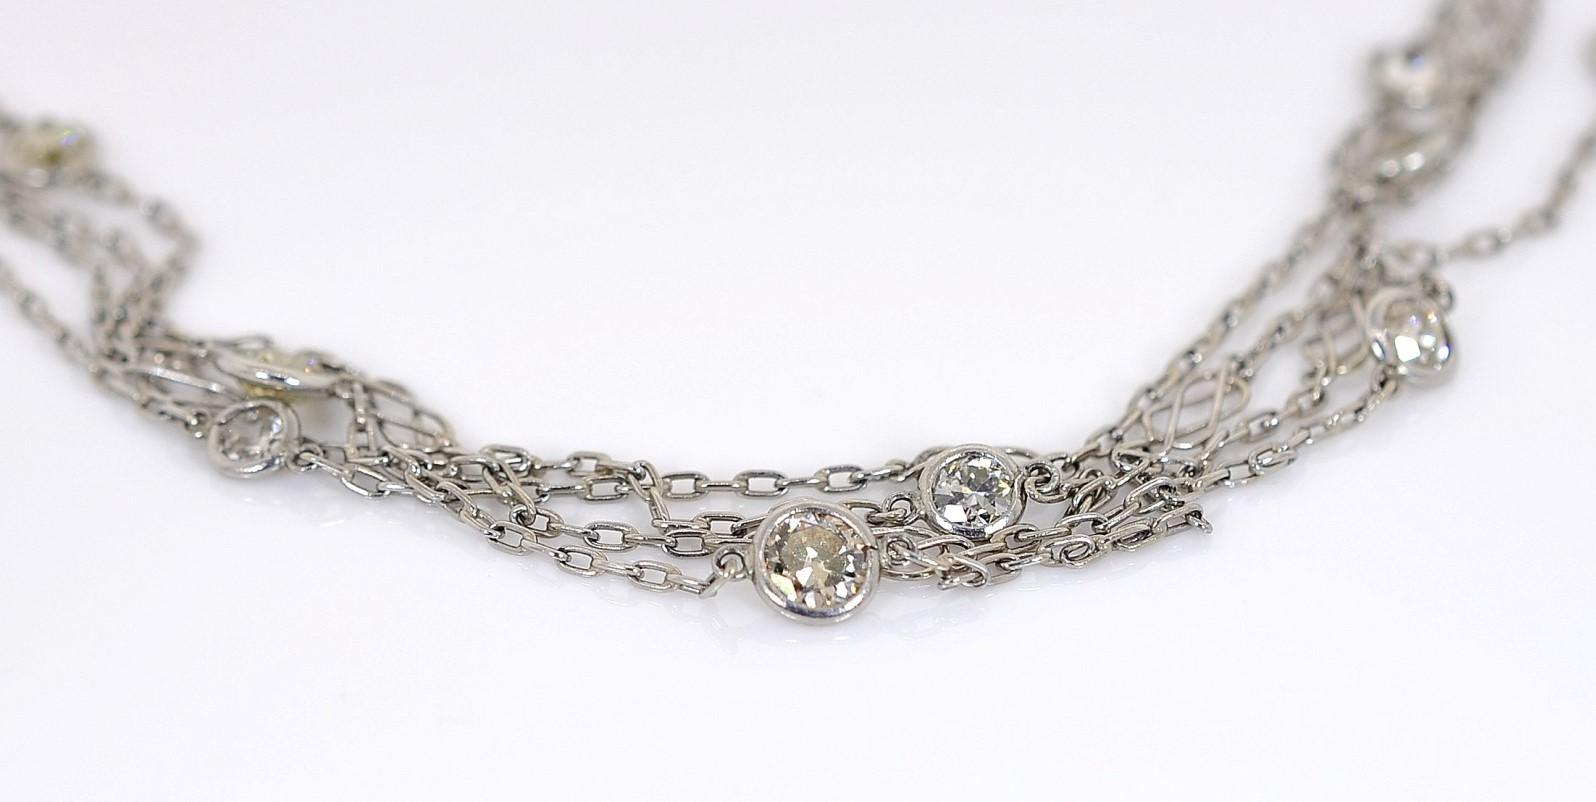 Hand-made of platinum this lovely chain necklace is interspersed with twenty five (25) Old sparkling and Round Brilliant cut diamonds, totaling 5.54 carat.  The bezel set diamonds vary in size and color creating an interesting mix.  Filigree swirl